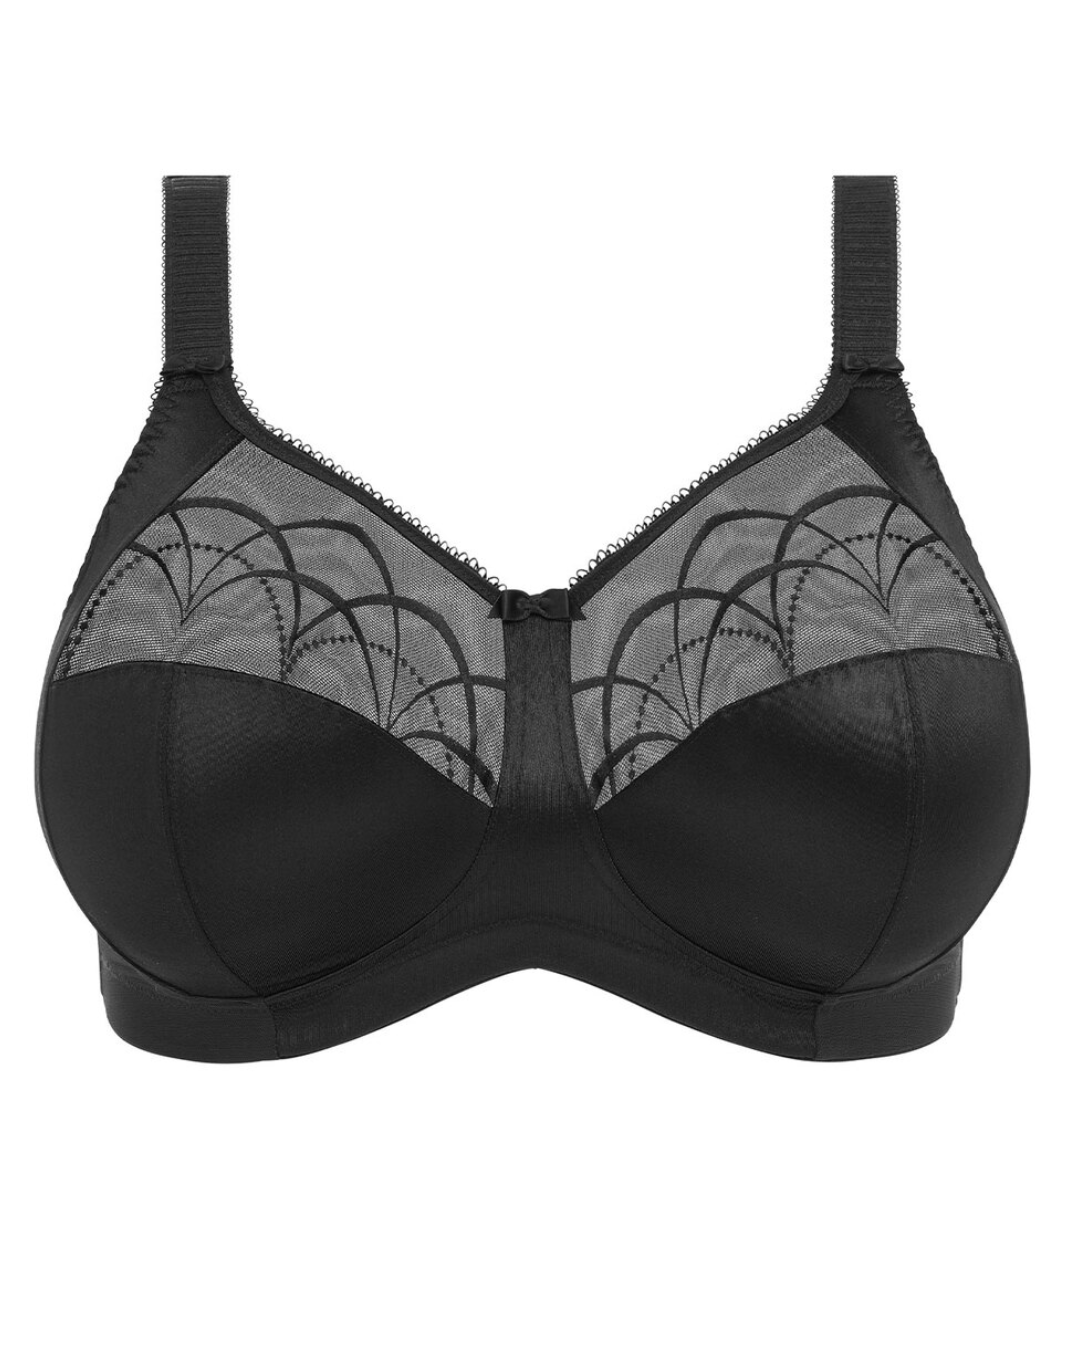 Elomi Cate Soft Cup Bra - Black – The Fitting Service